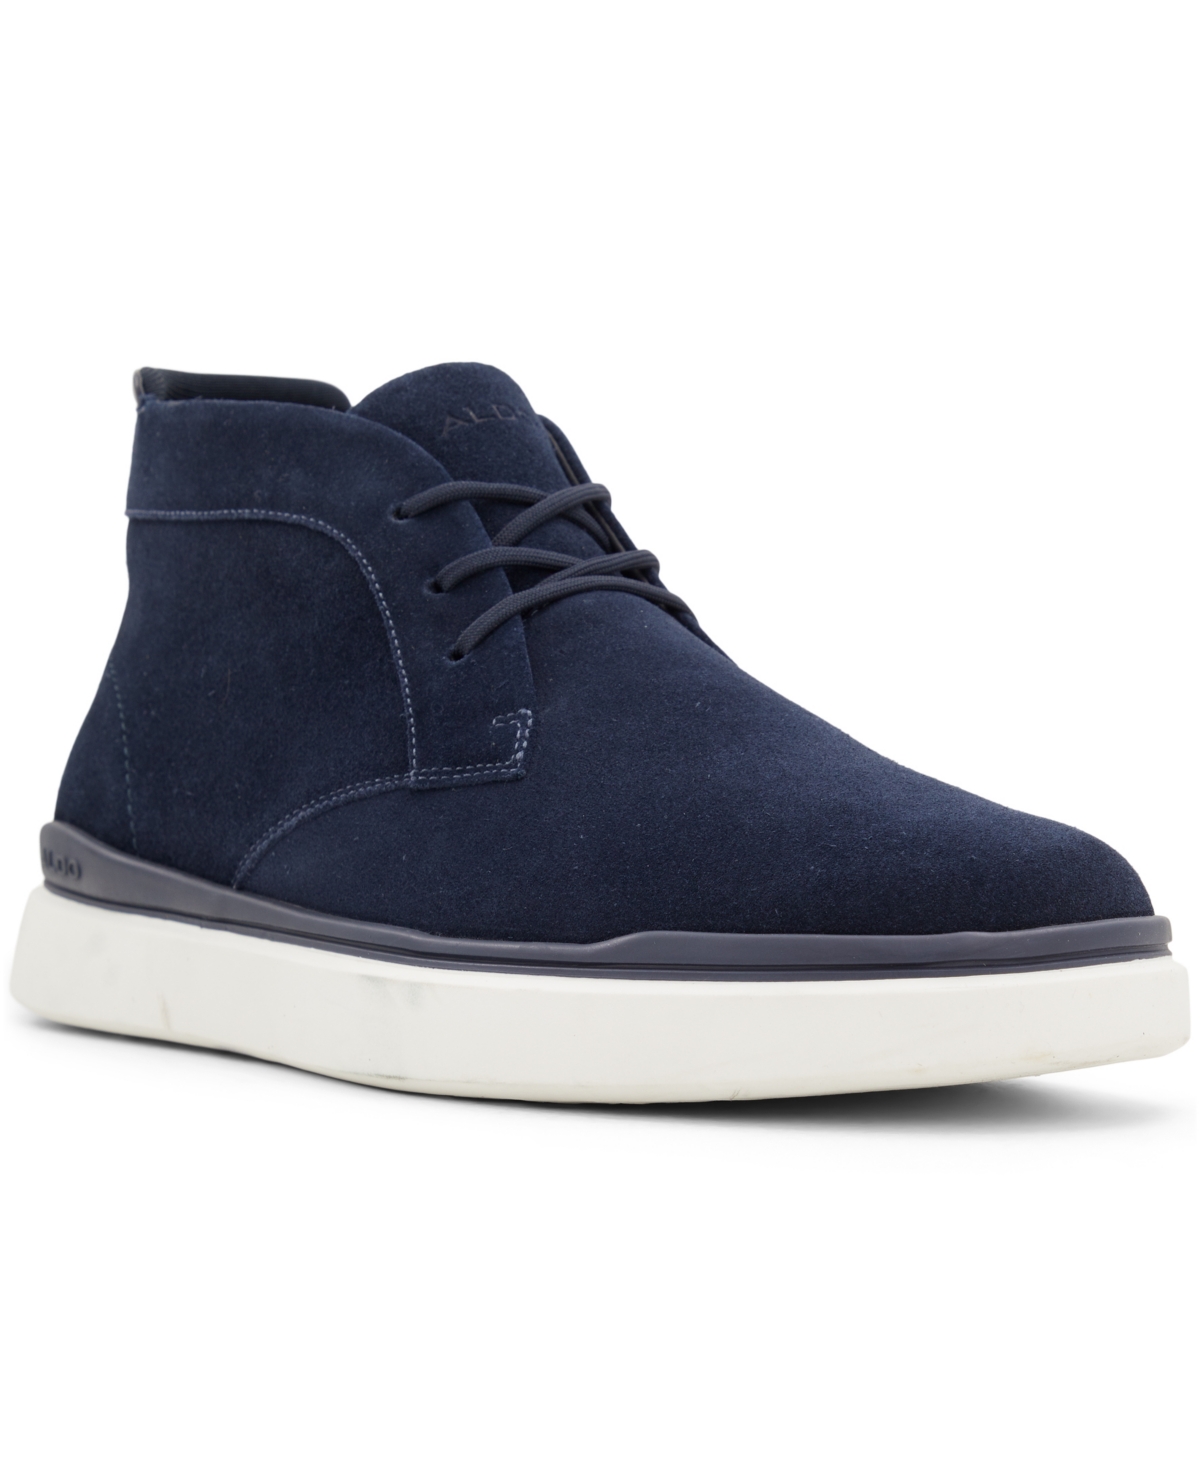 Men's Rutger Lace-Up Shoes - Other Navy